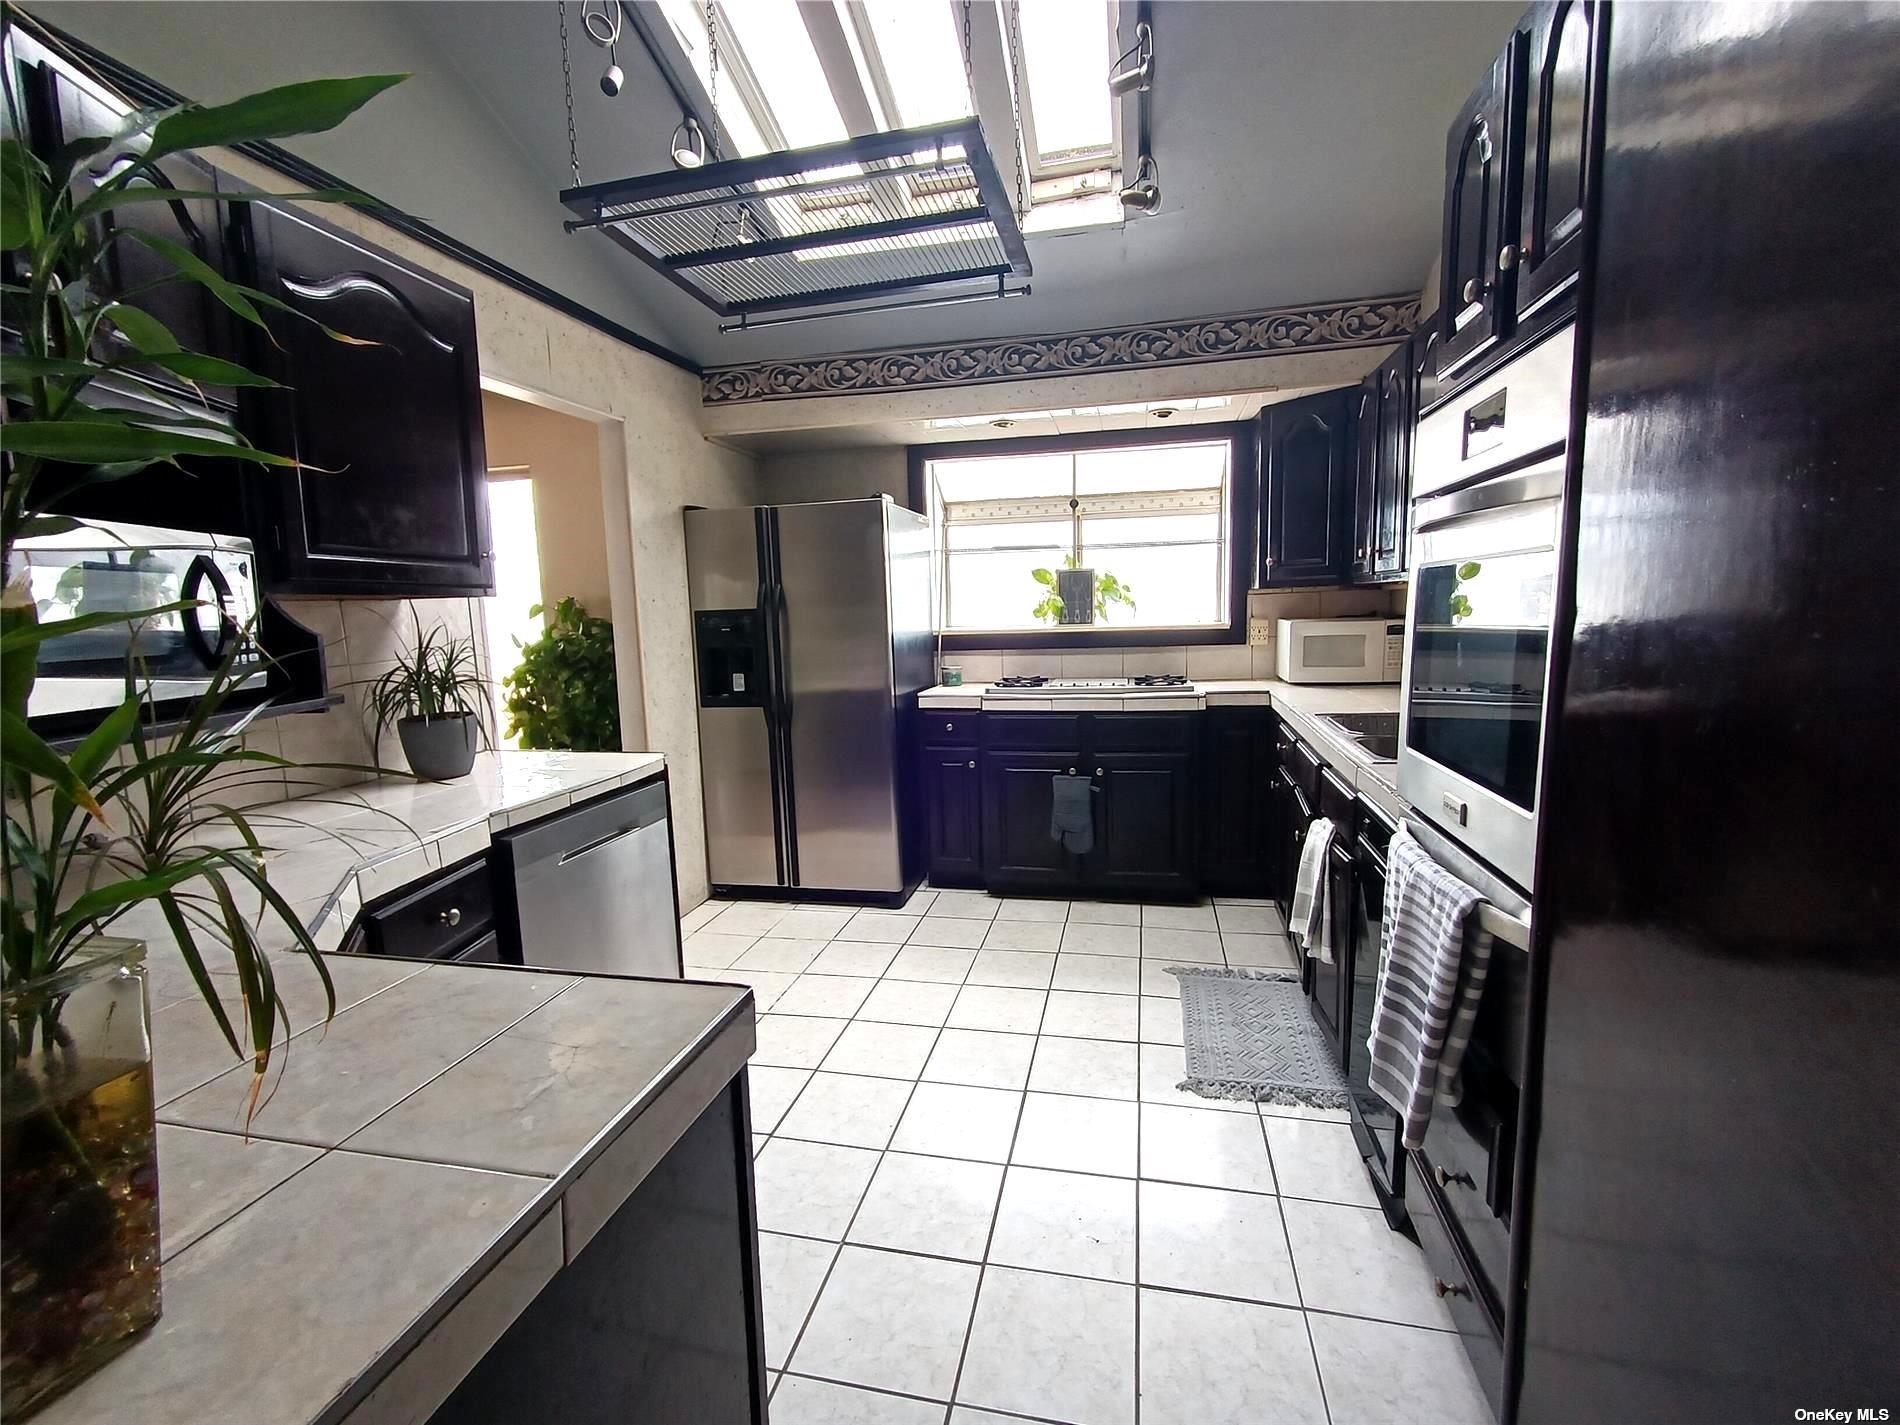 a kitchen with stainless steel appliances granite countertop sink stove and cabinets